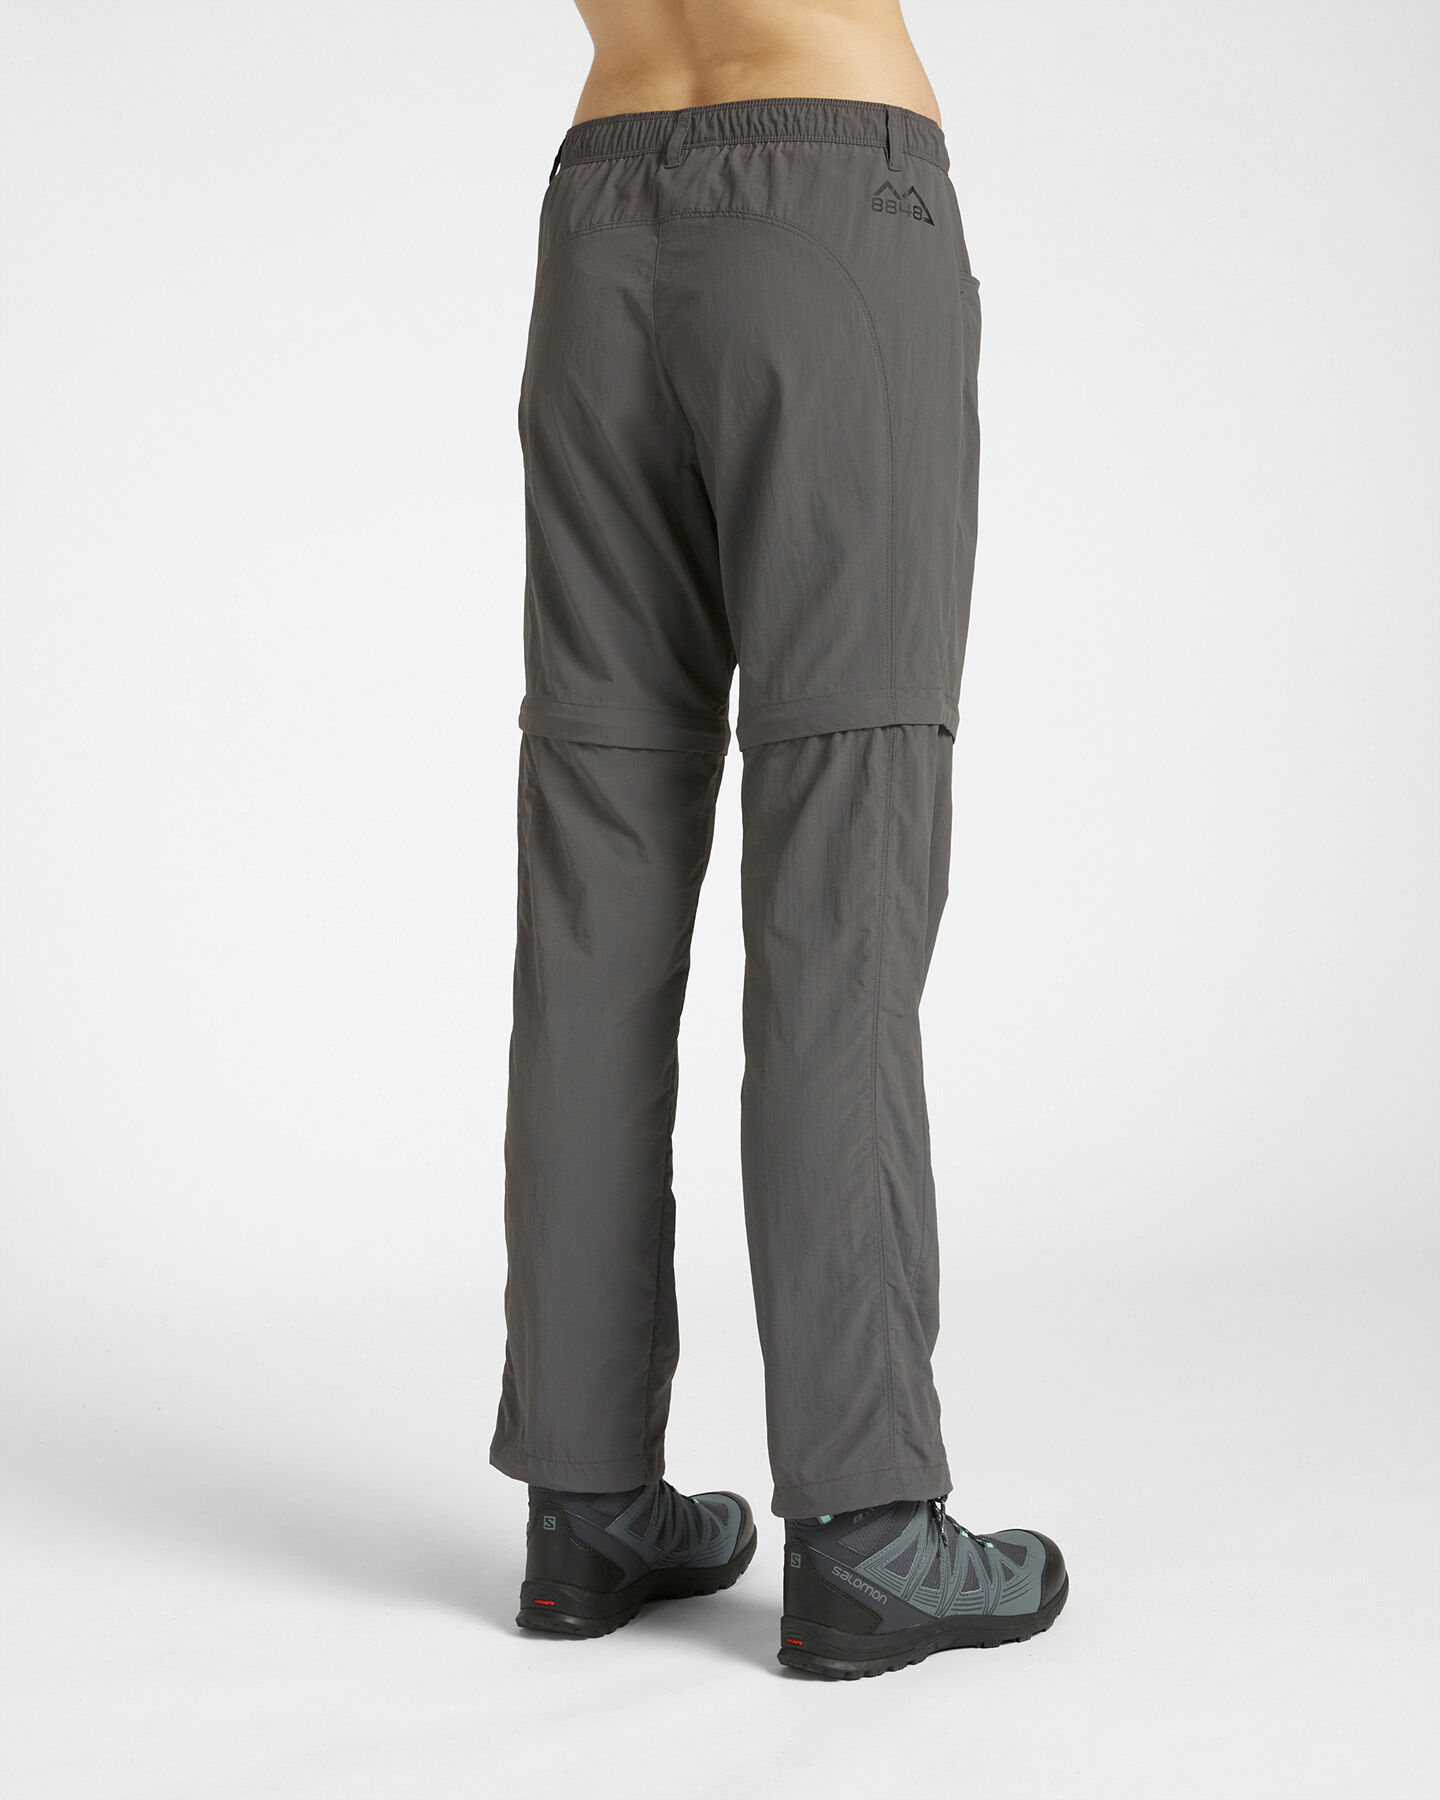  Pantalone outdoor 8848 MOUNTAIN ESSENTIAL W S4120735|986|XS scatto 1